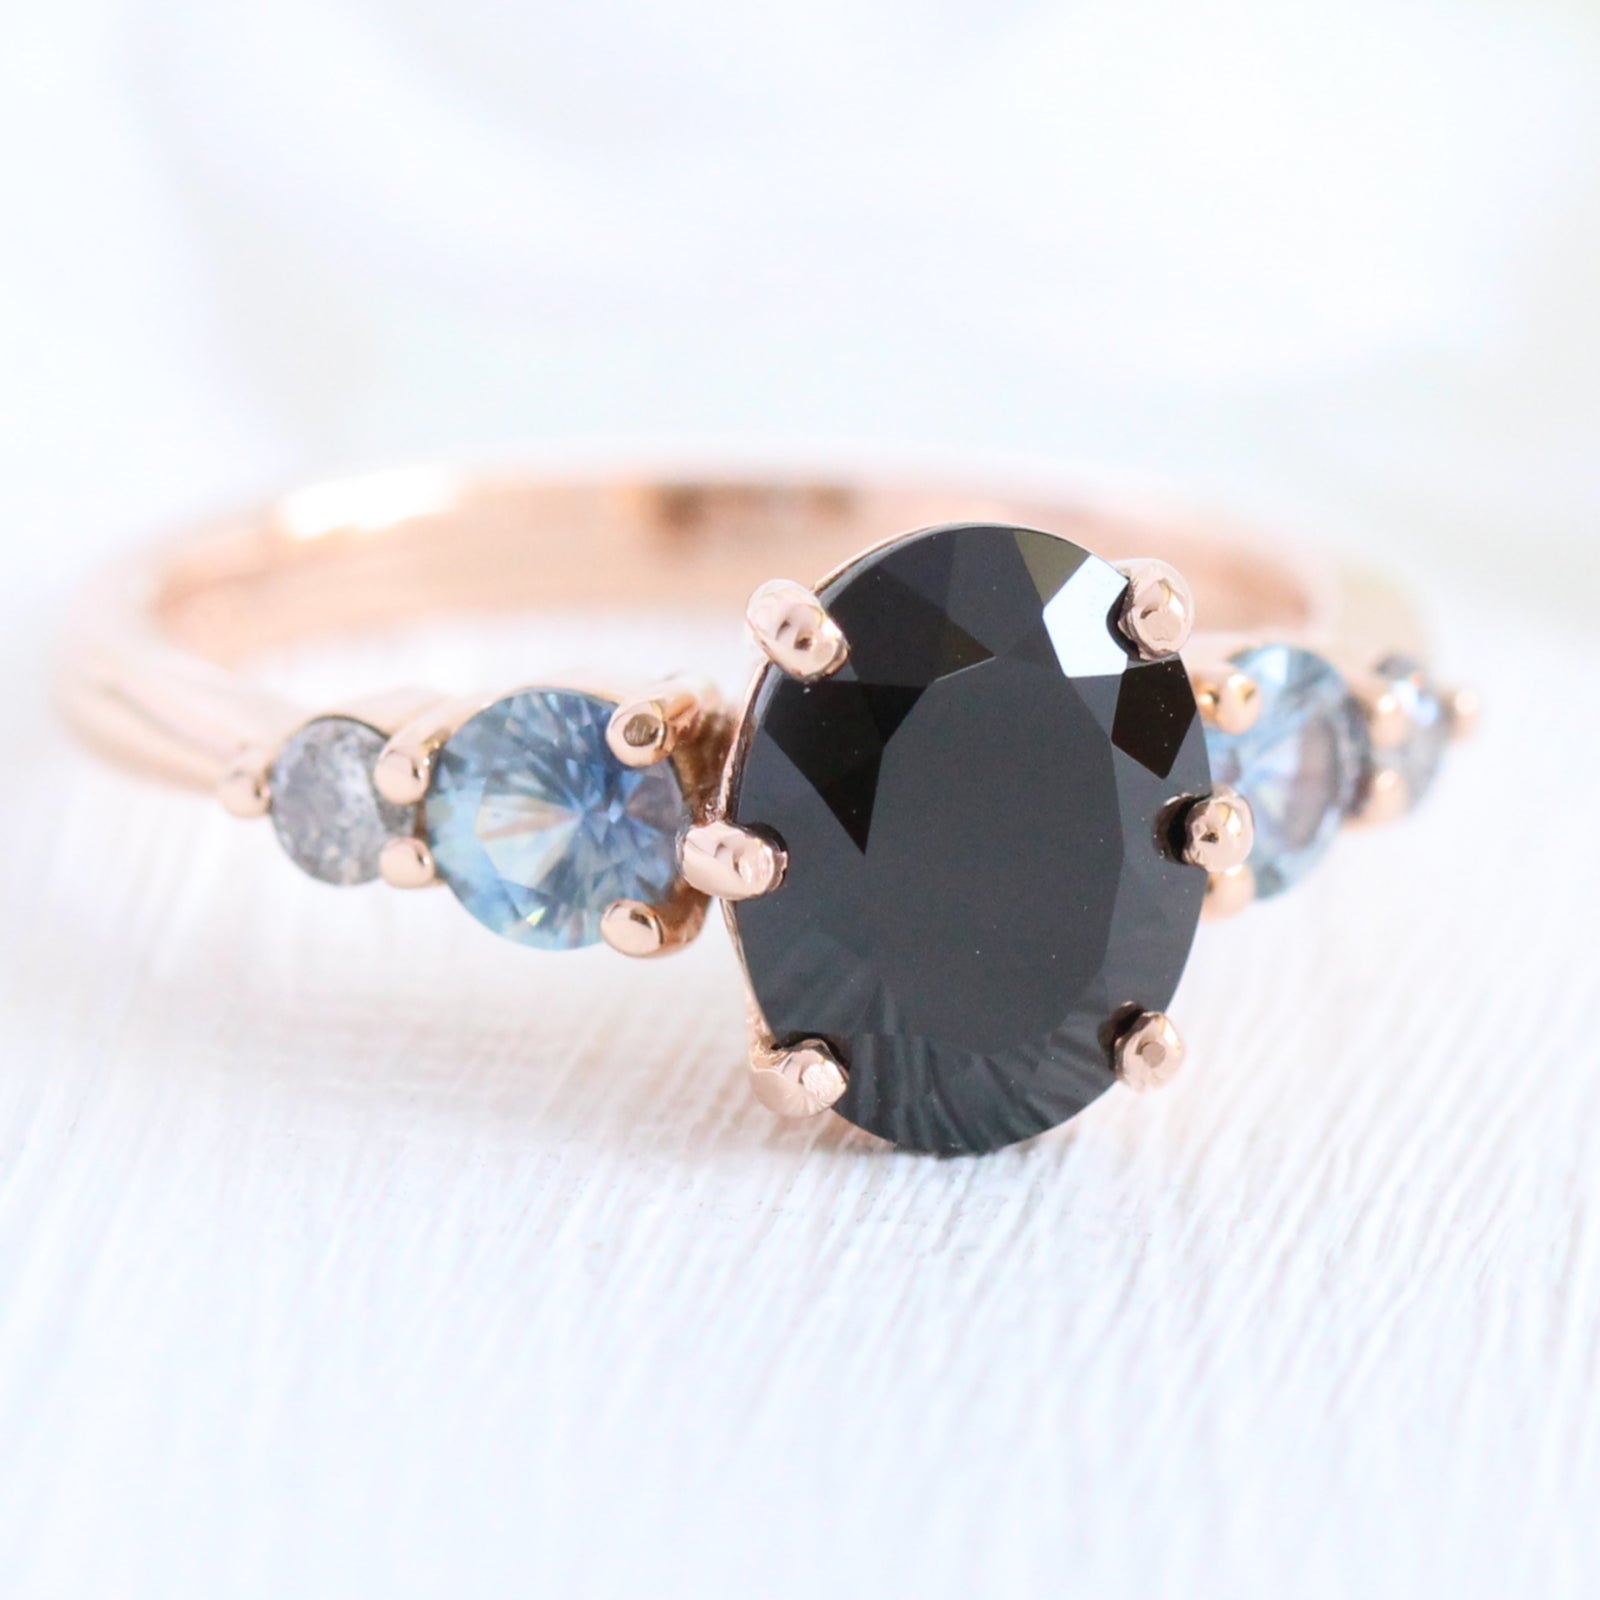 Black Spinel and Sapphire Engagement Ring in Rose Gold 5 Stone Diamond Ring by La More Design Jewelry